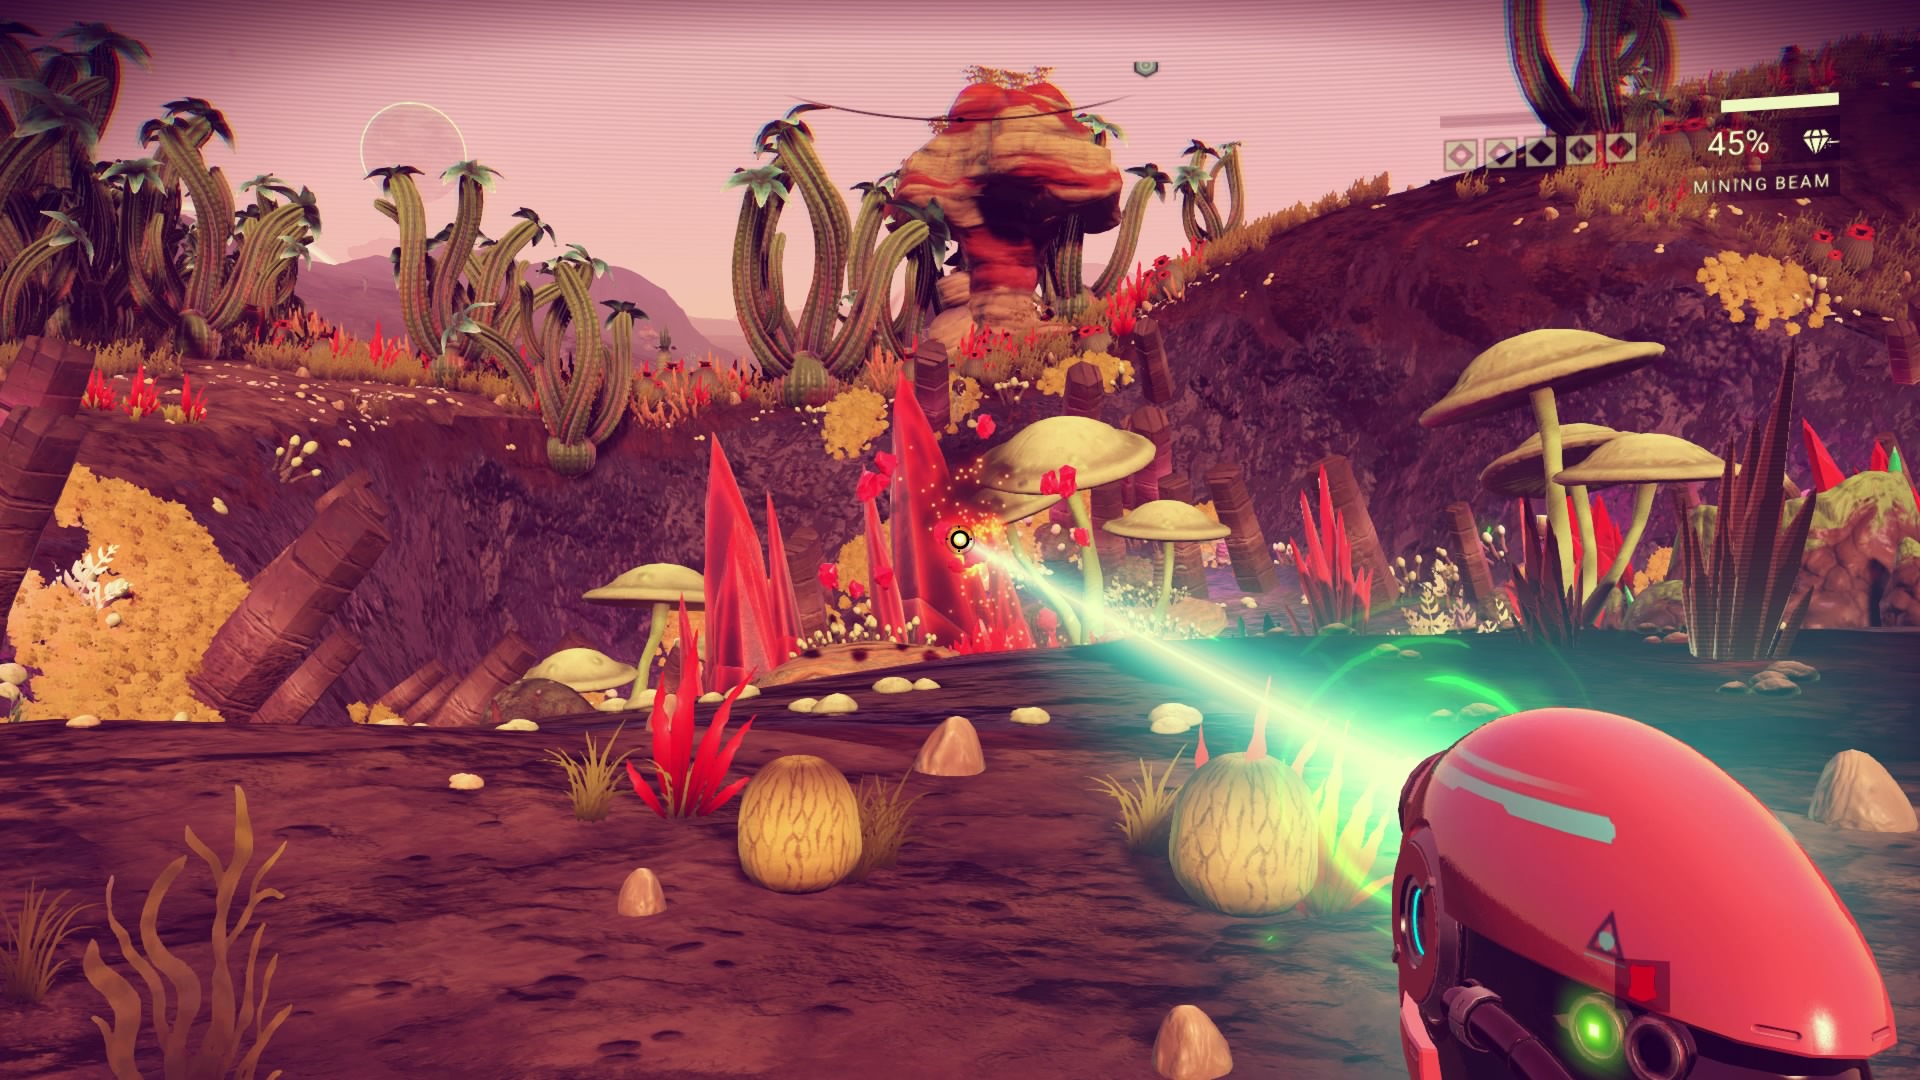 What to do in first few hours of No Man's Sky